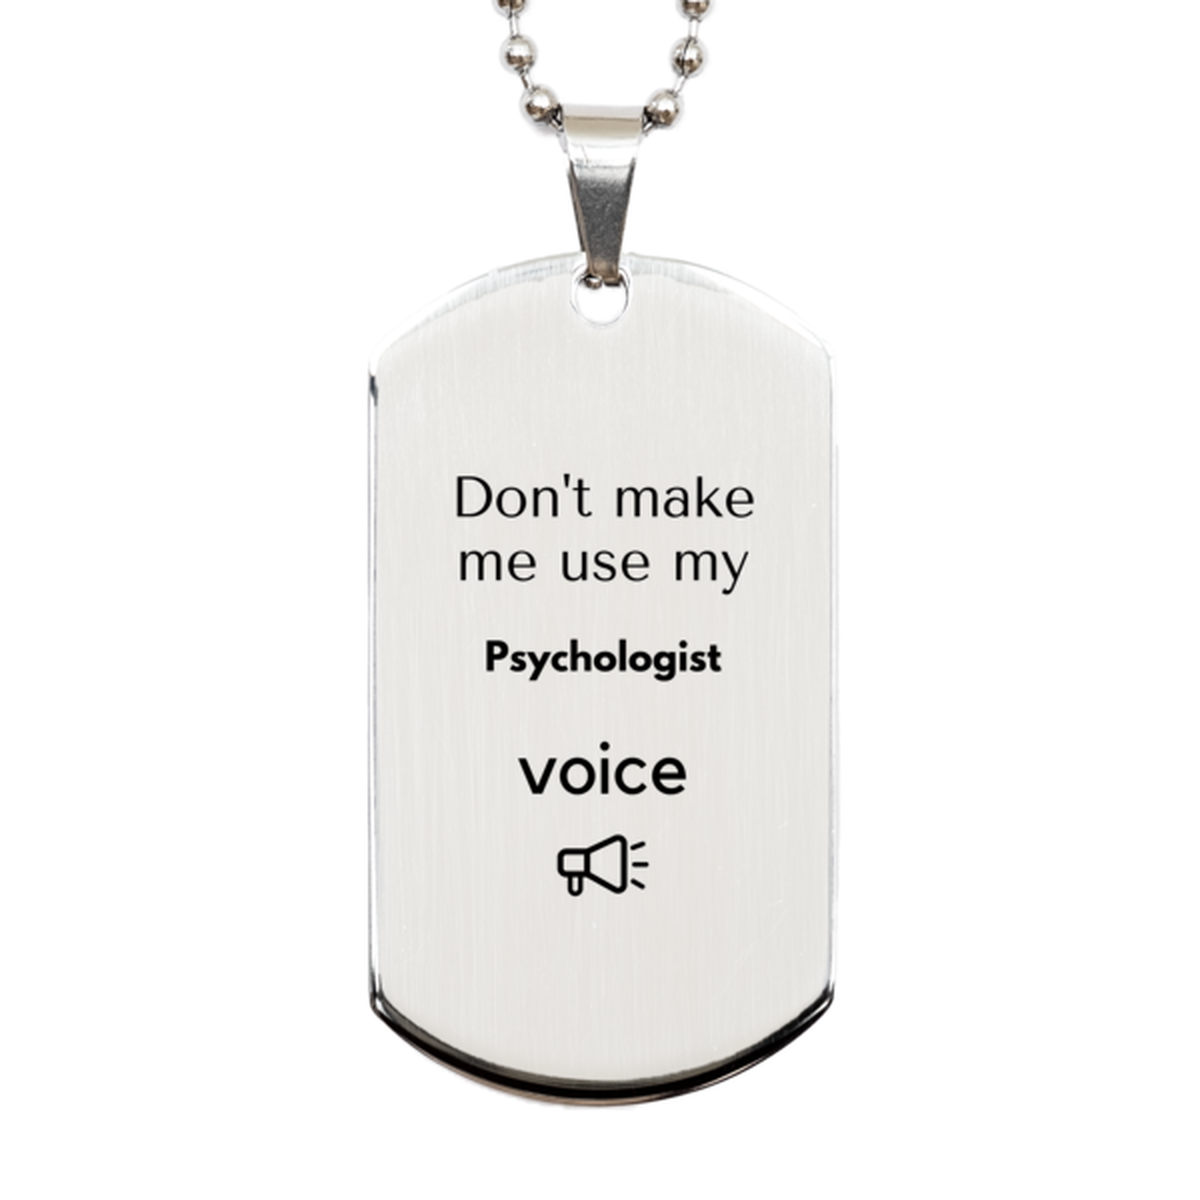 Don't make me use my Psychologist voice, Sarcasm Psychologist Gifts, Christmas Psychologist Silver Dog Tag Birthday Unique Gifts For Psychologist Coworkers, Men, Women, Colleague, Friends